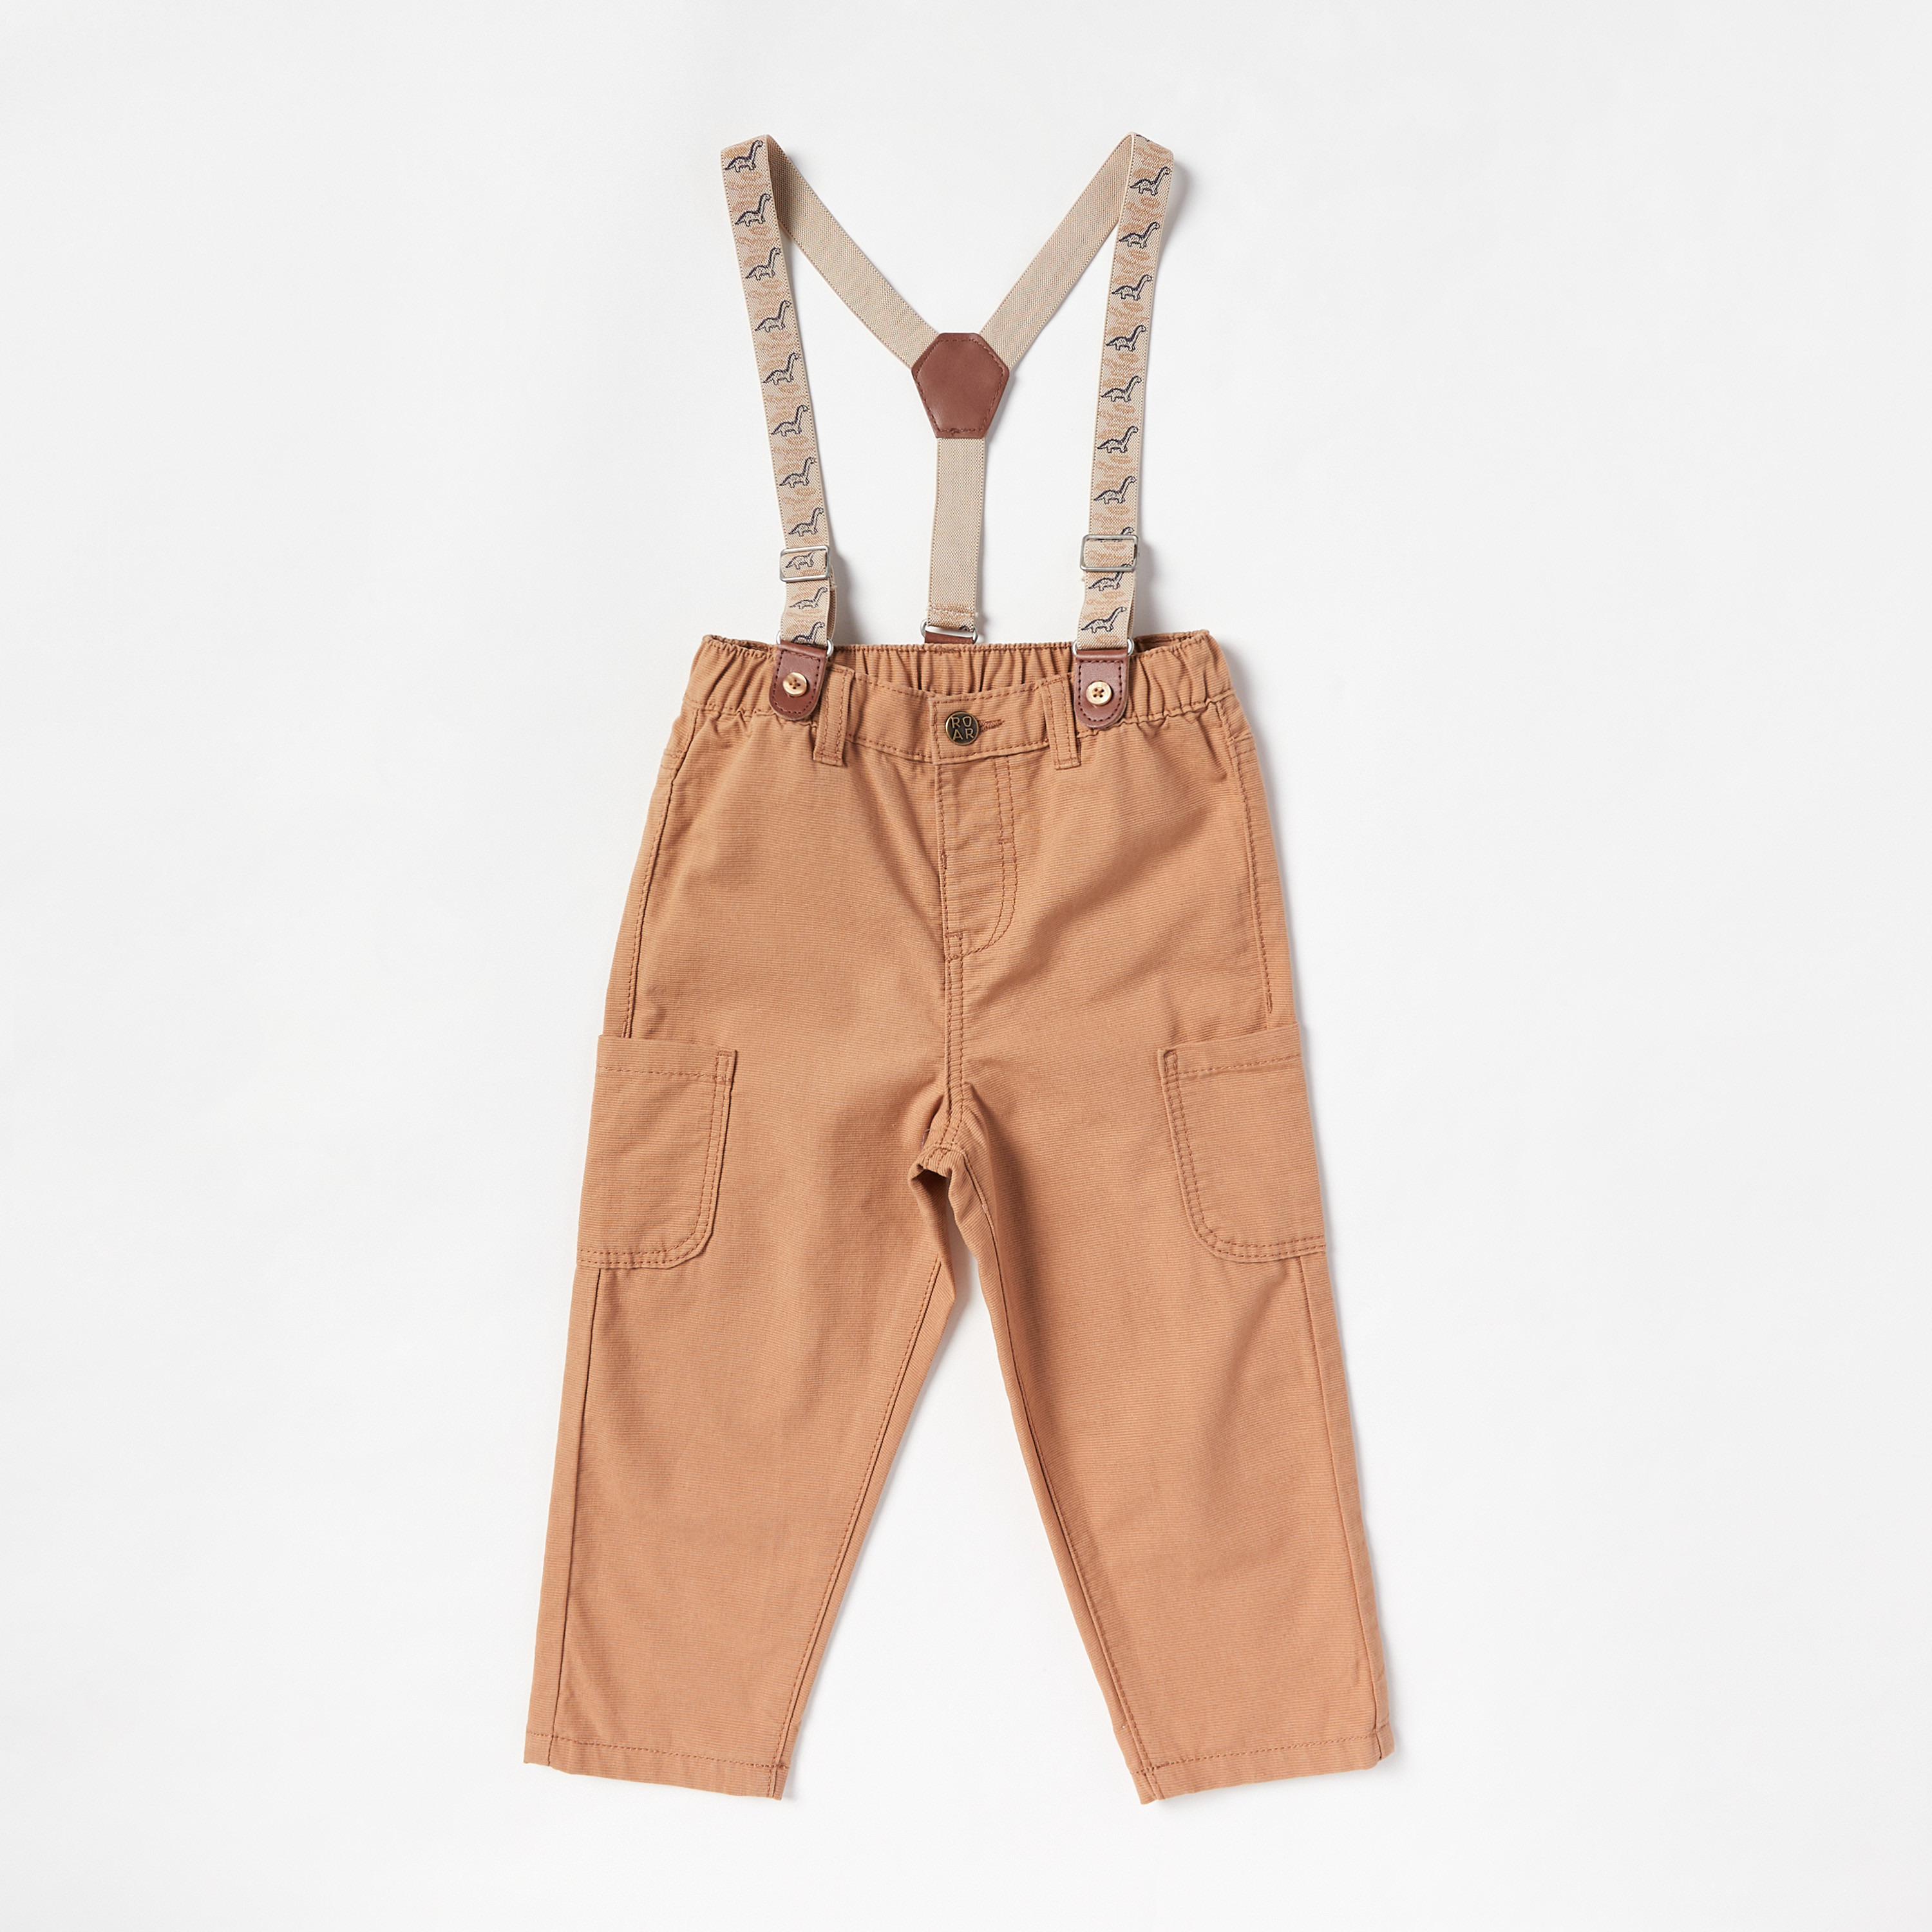 Buy United Colors Of Benetton Boys Black Trousers With Suspenders - Trousers  for Boys 1537843 | Myntra